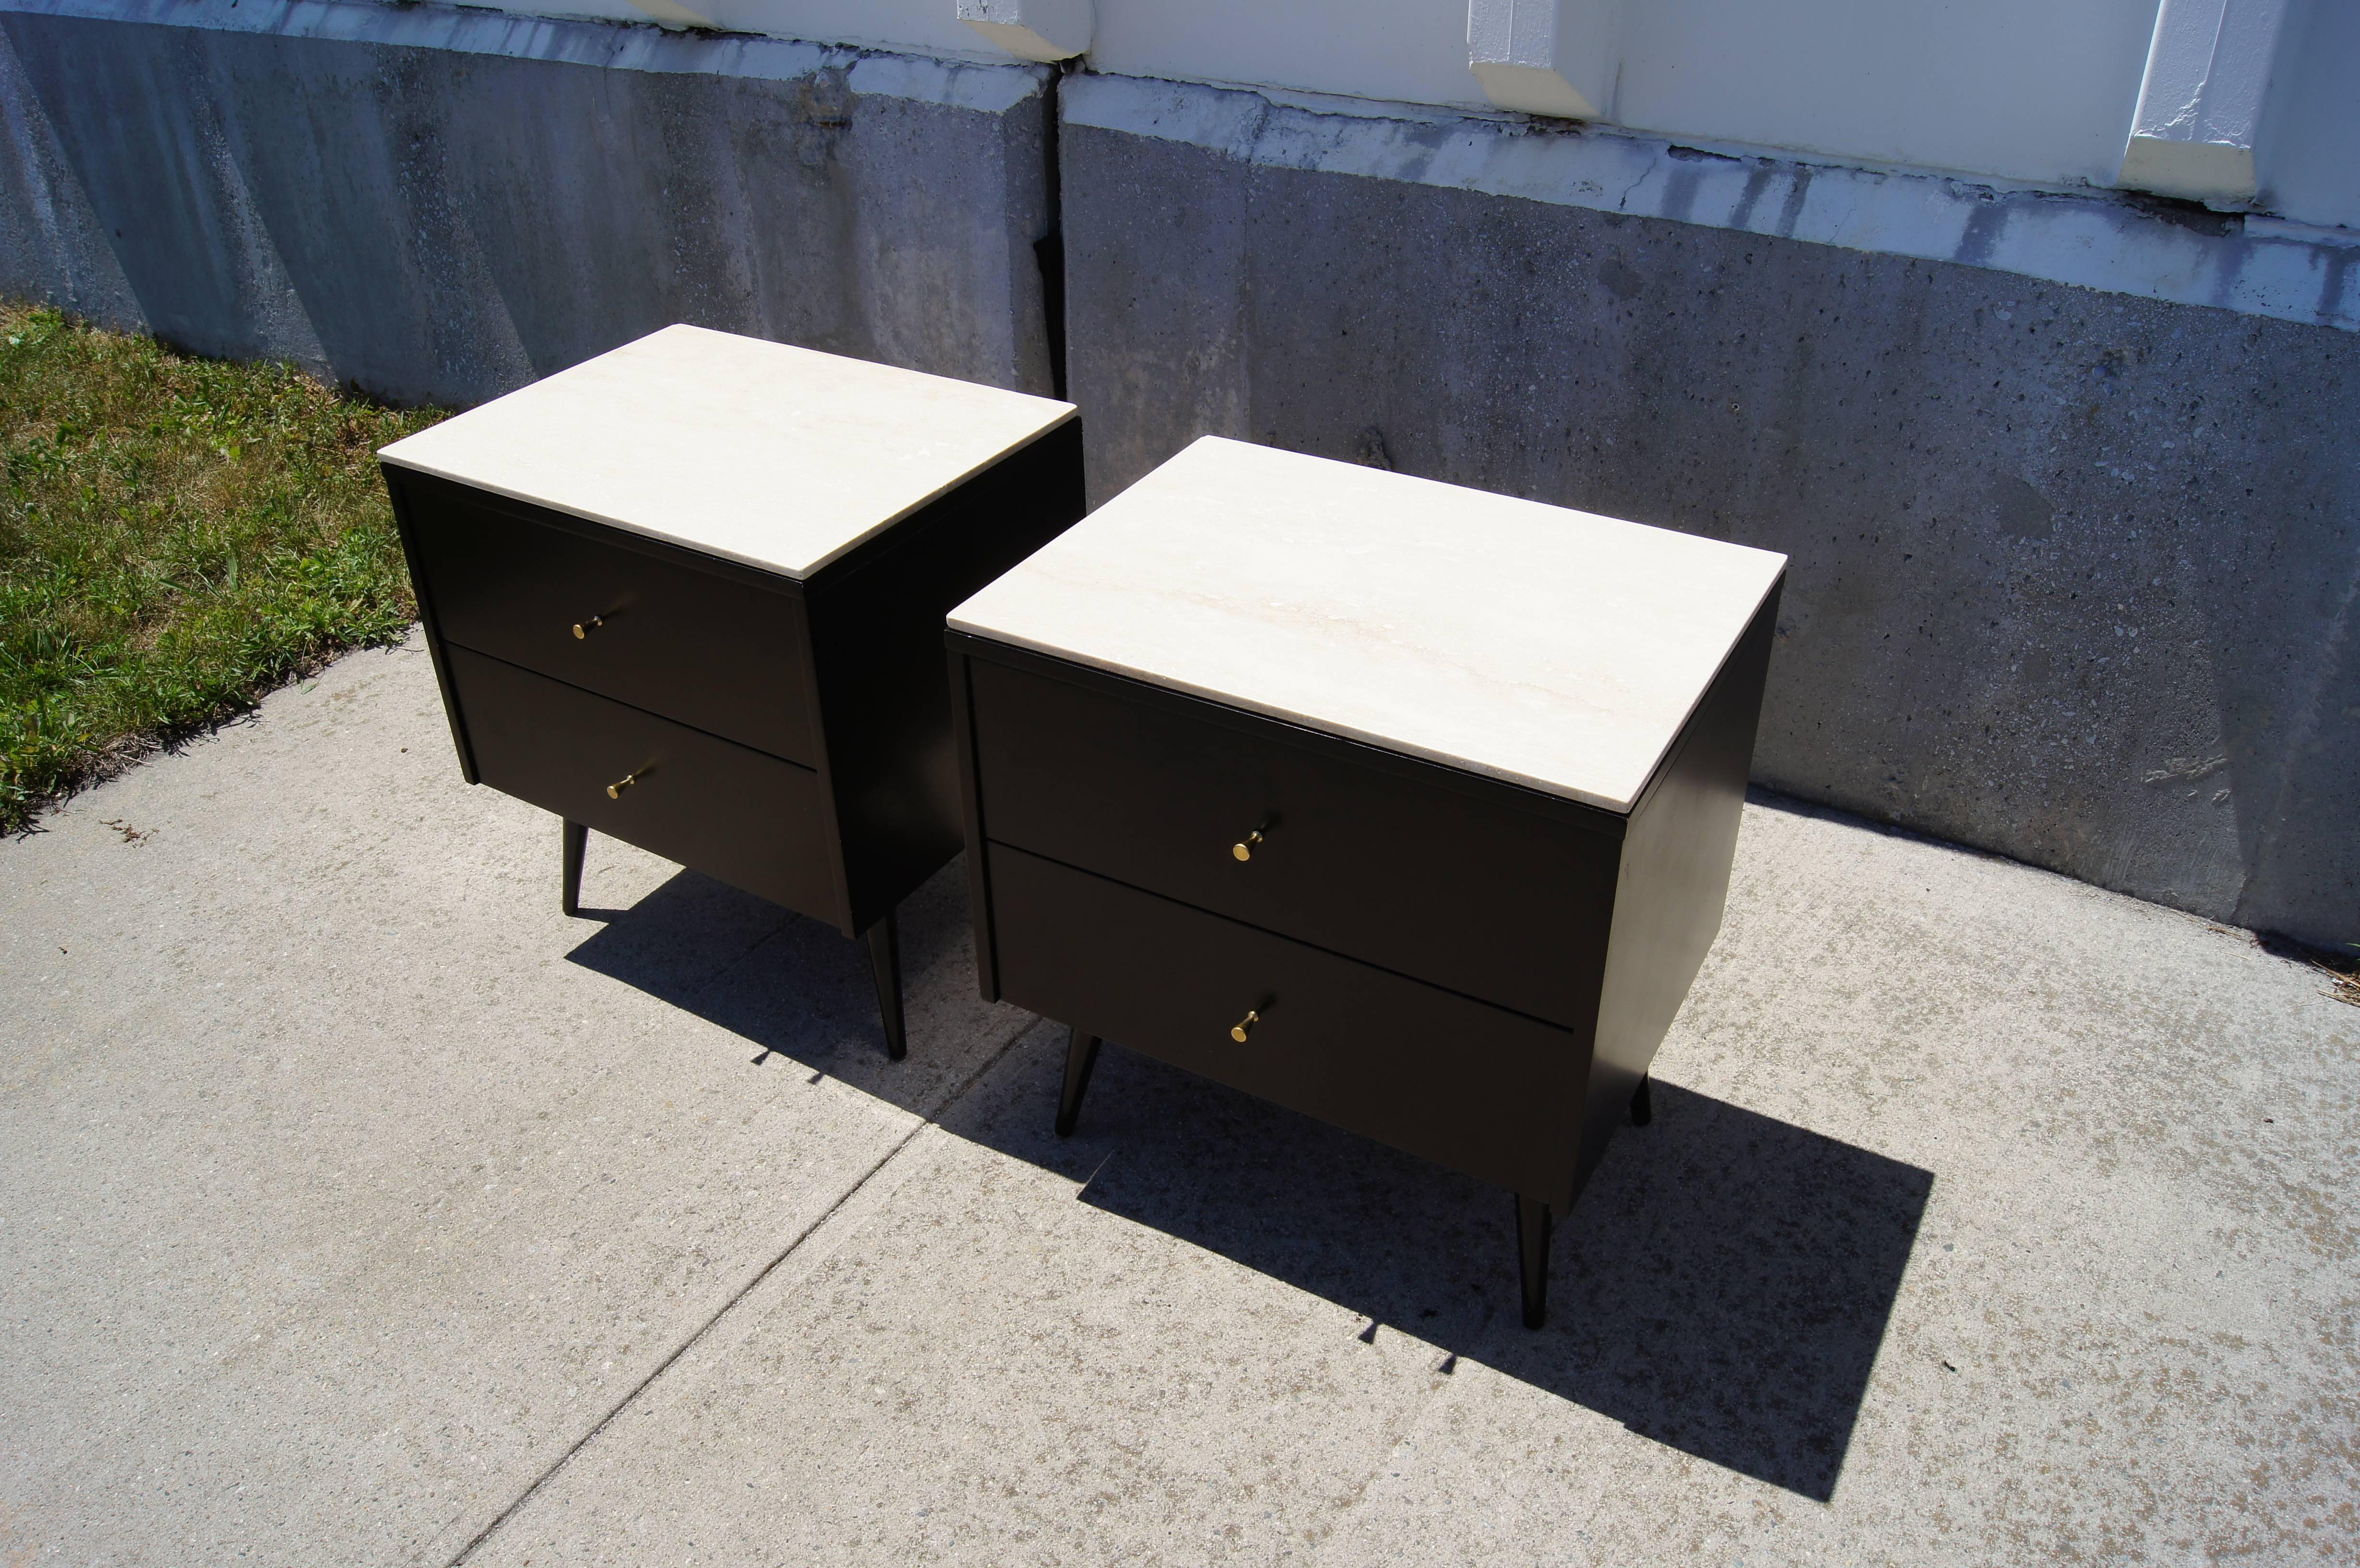 Part of Paul McCobb’s Planner group for Winchendon, this pair of nightstands comprises black-lacquered maple cases with two drawers set on canted legs. The contrasting white travertine marble tops and brass conical pulls make them an especially